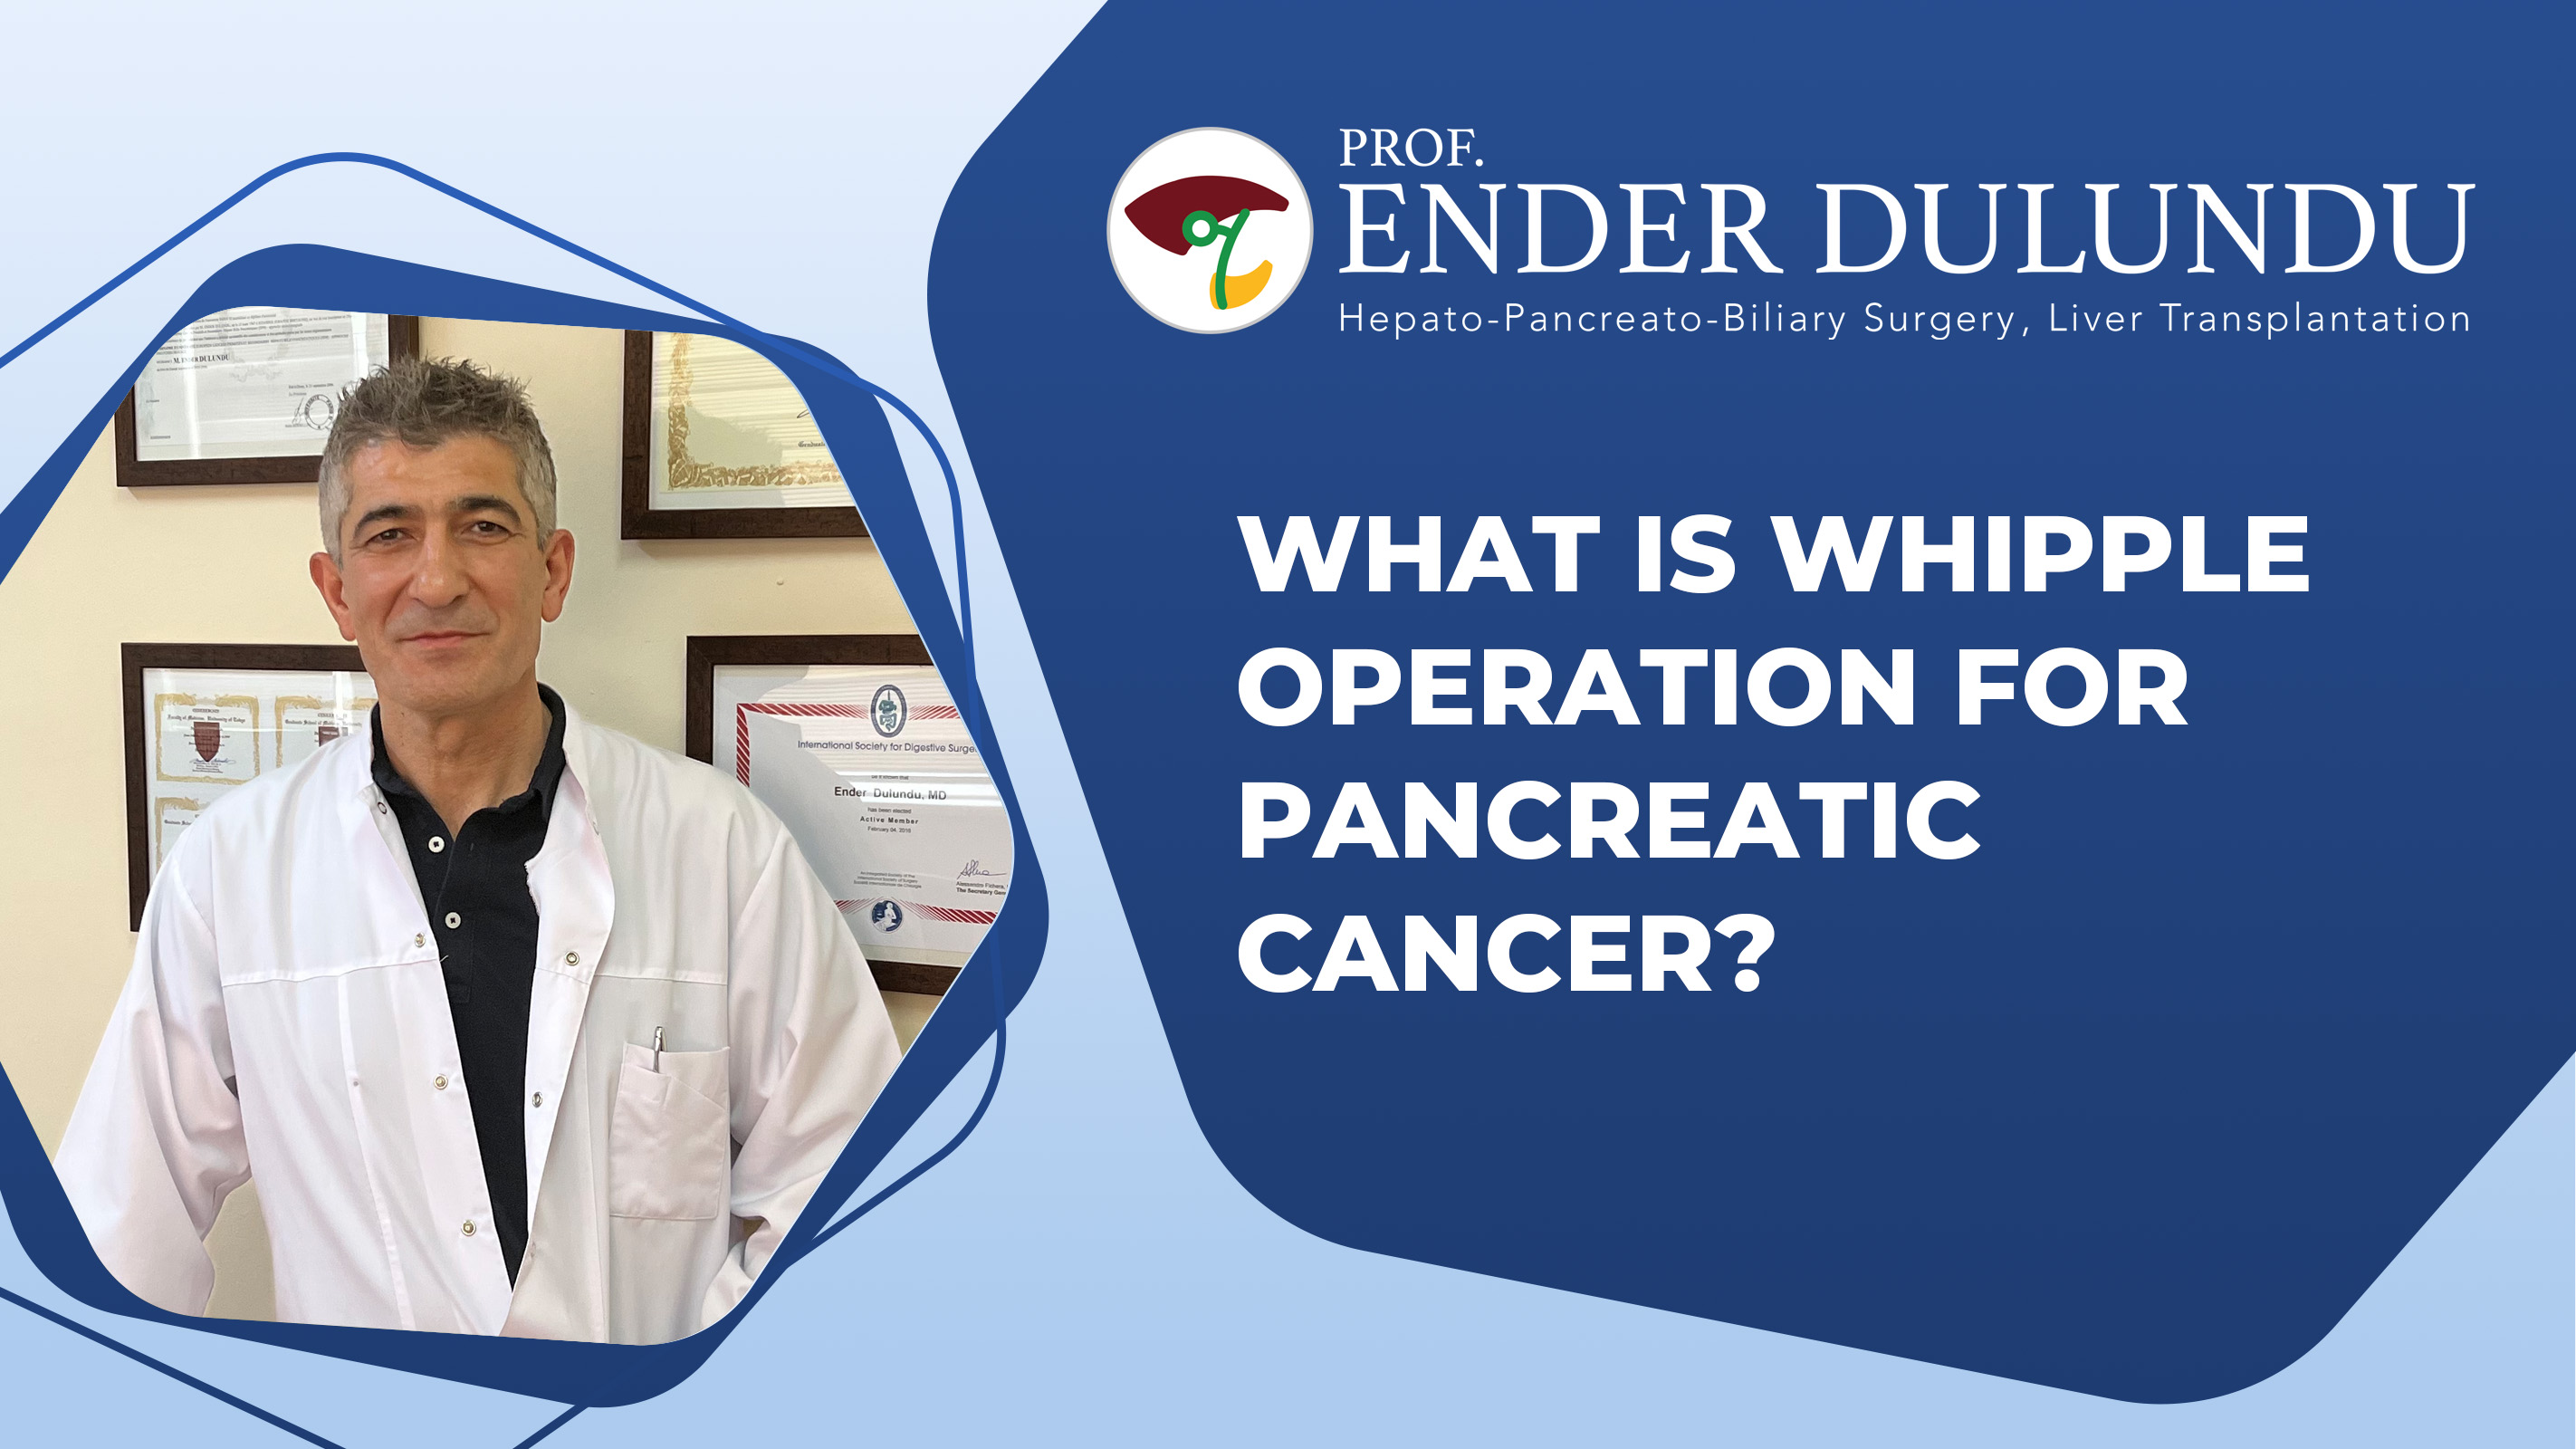 What Is Whipple Operation For Pancreatic Cancer?